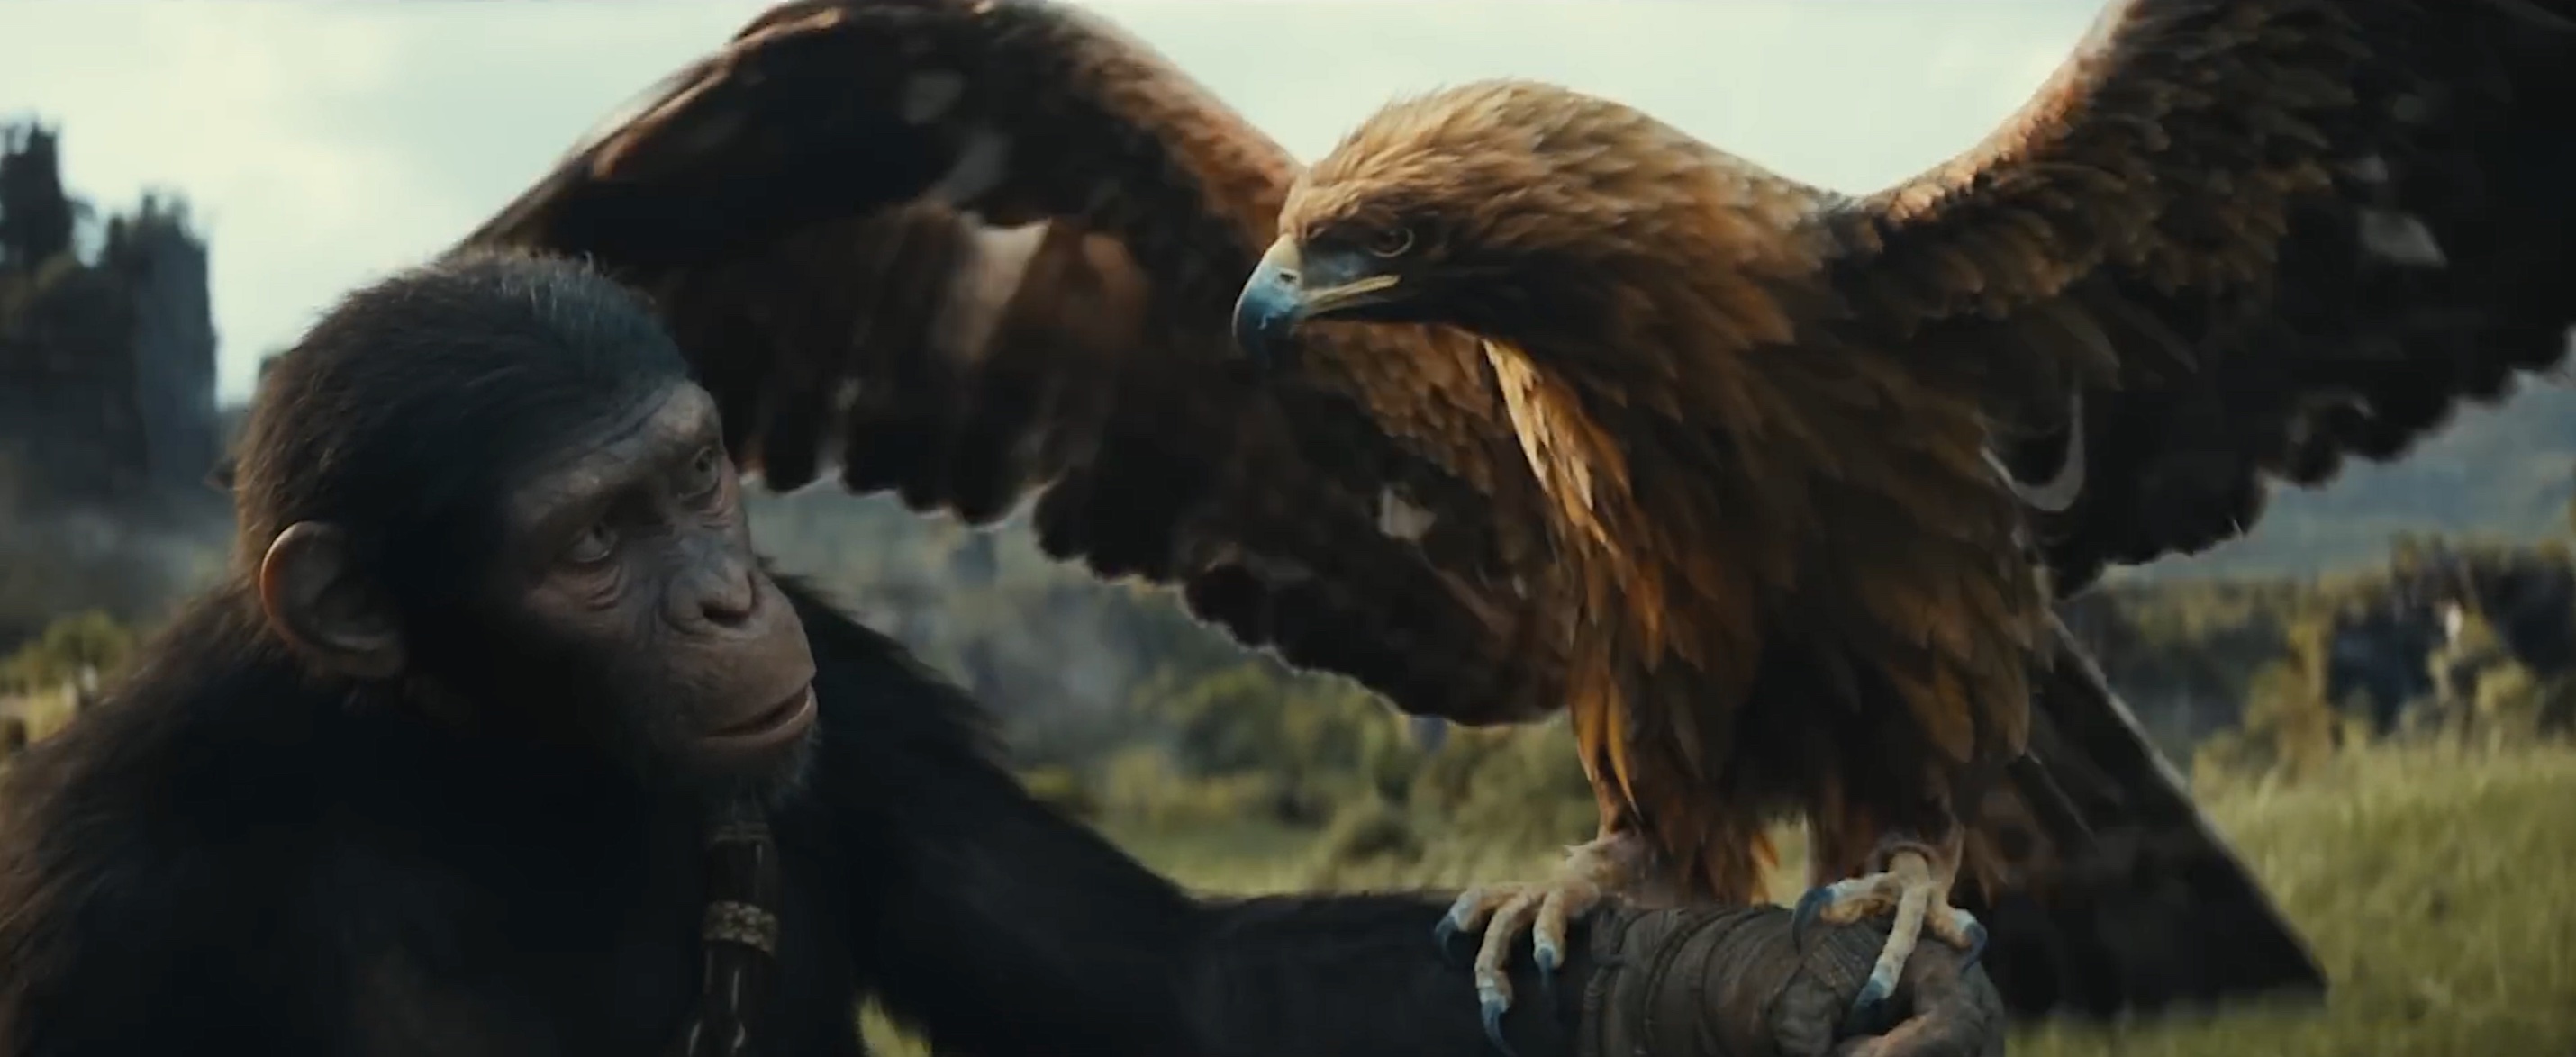 A screenshot from the first Kingdom of the Planet of the Apes teaser shows the chimp Noa looking at the eagle Sun as Sun lands on his arm